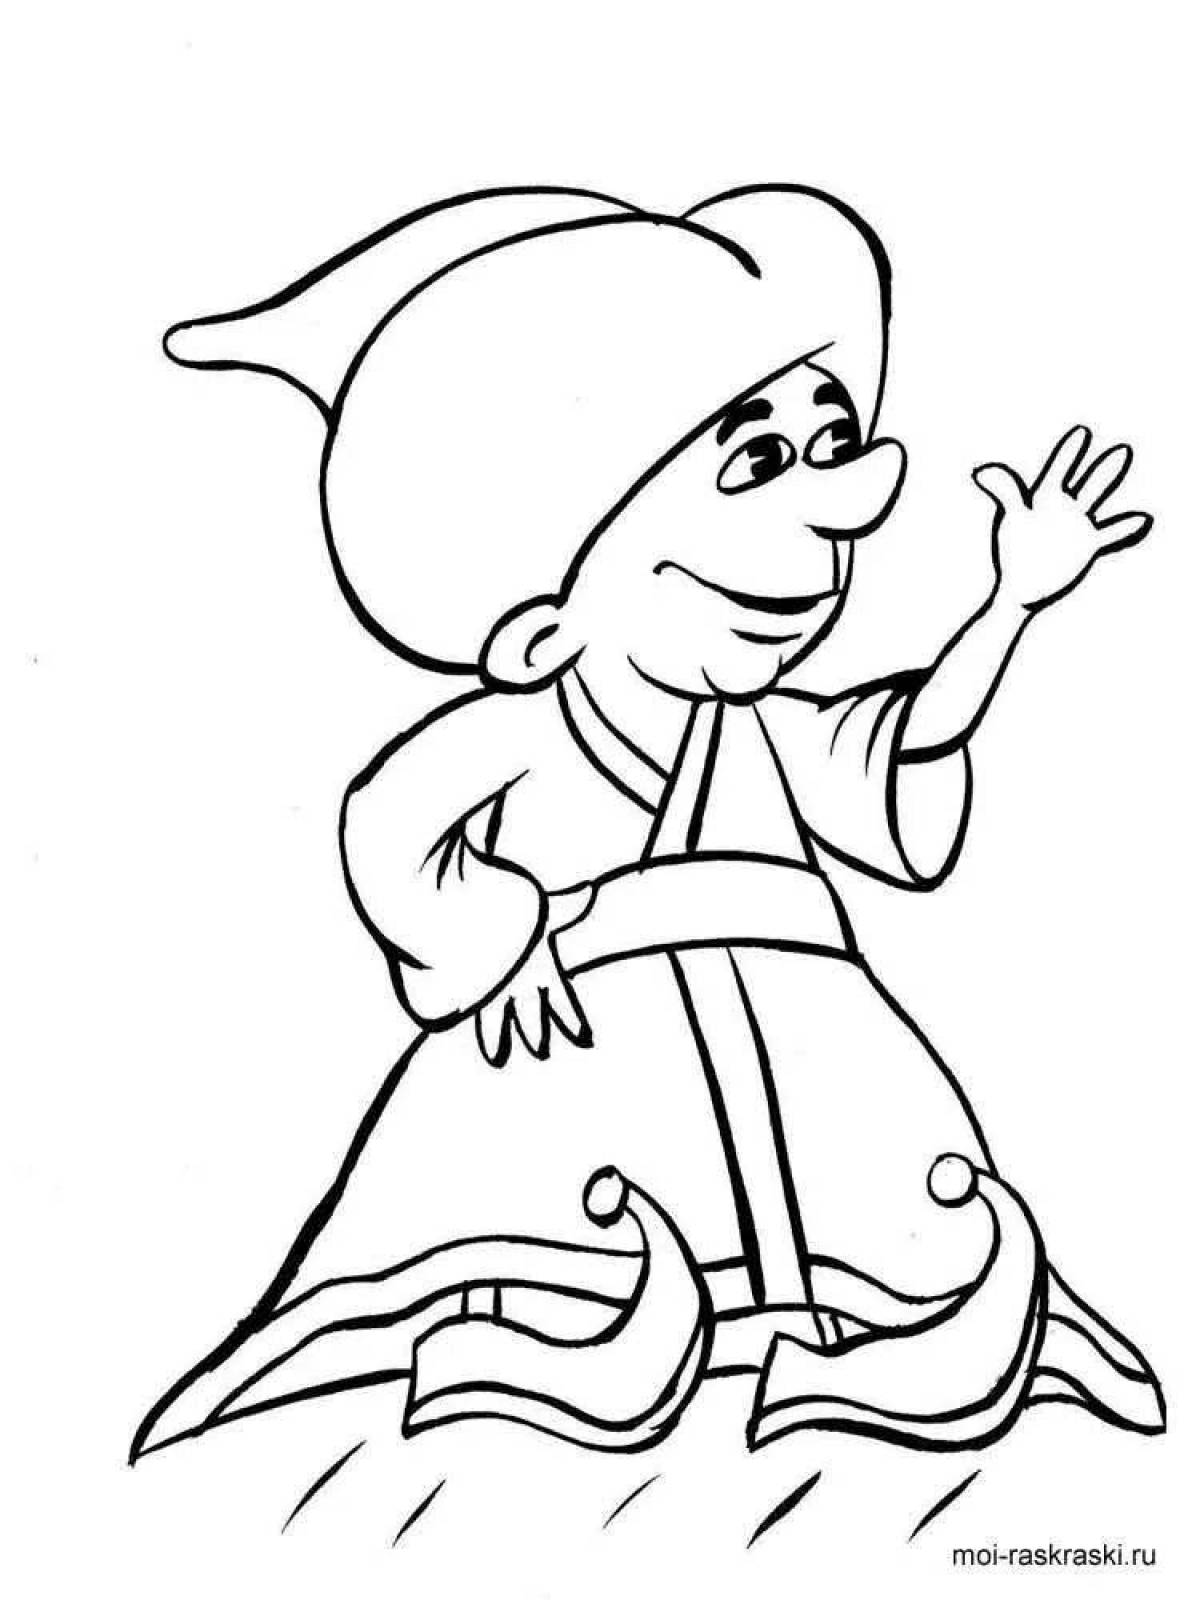 Gorgeous charan coloring page